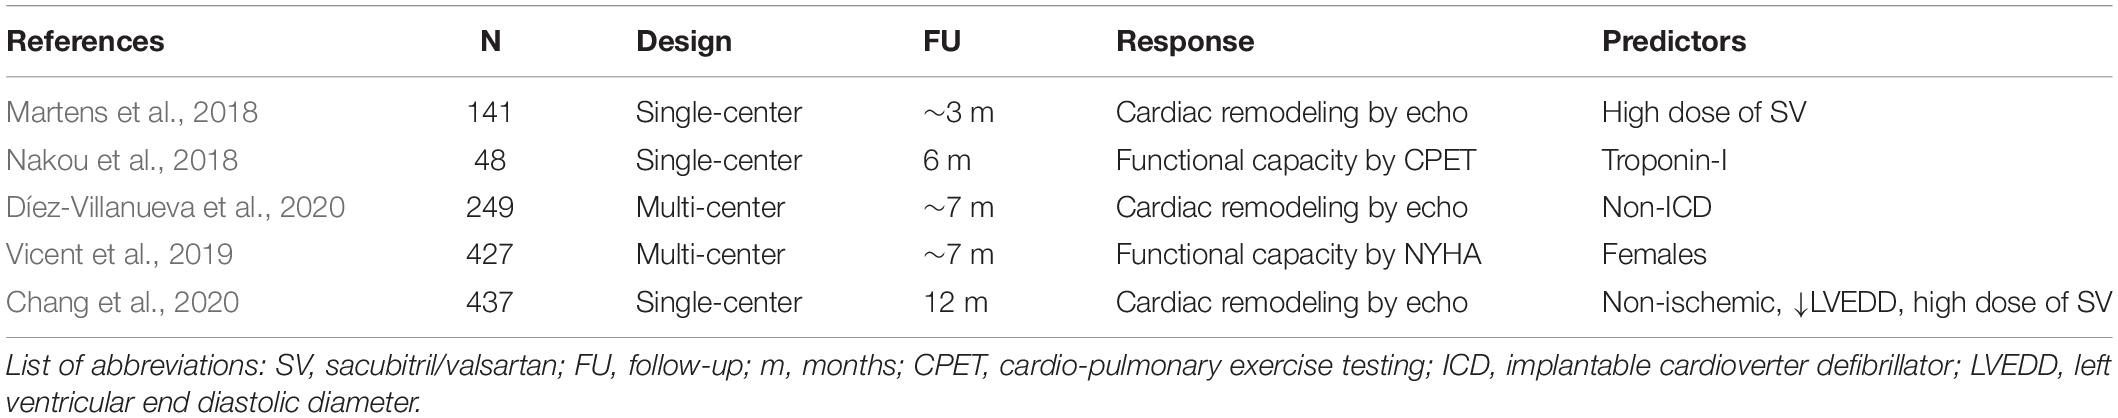 Frontiers A Simple Score To Identify Super Responders To Sacubitril Valsartan In Ambulatory Patients With Heart Failure Physiology